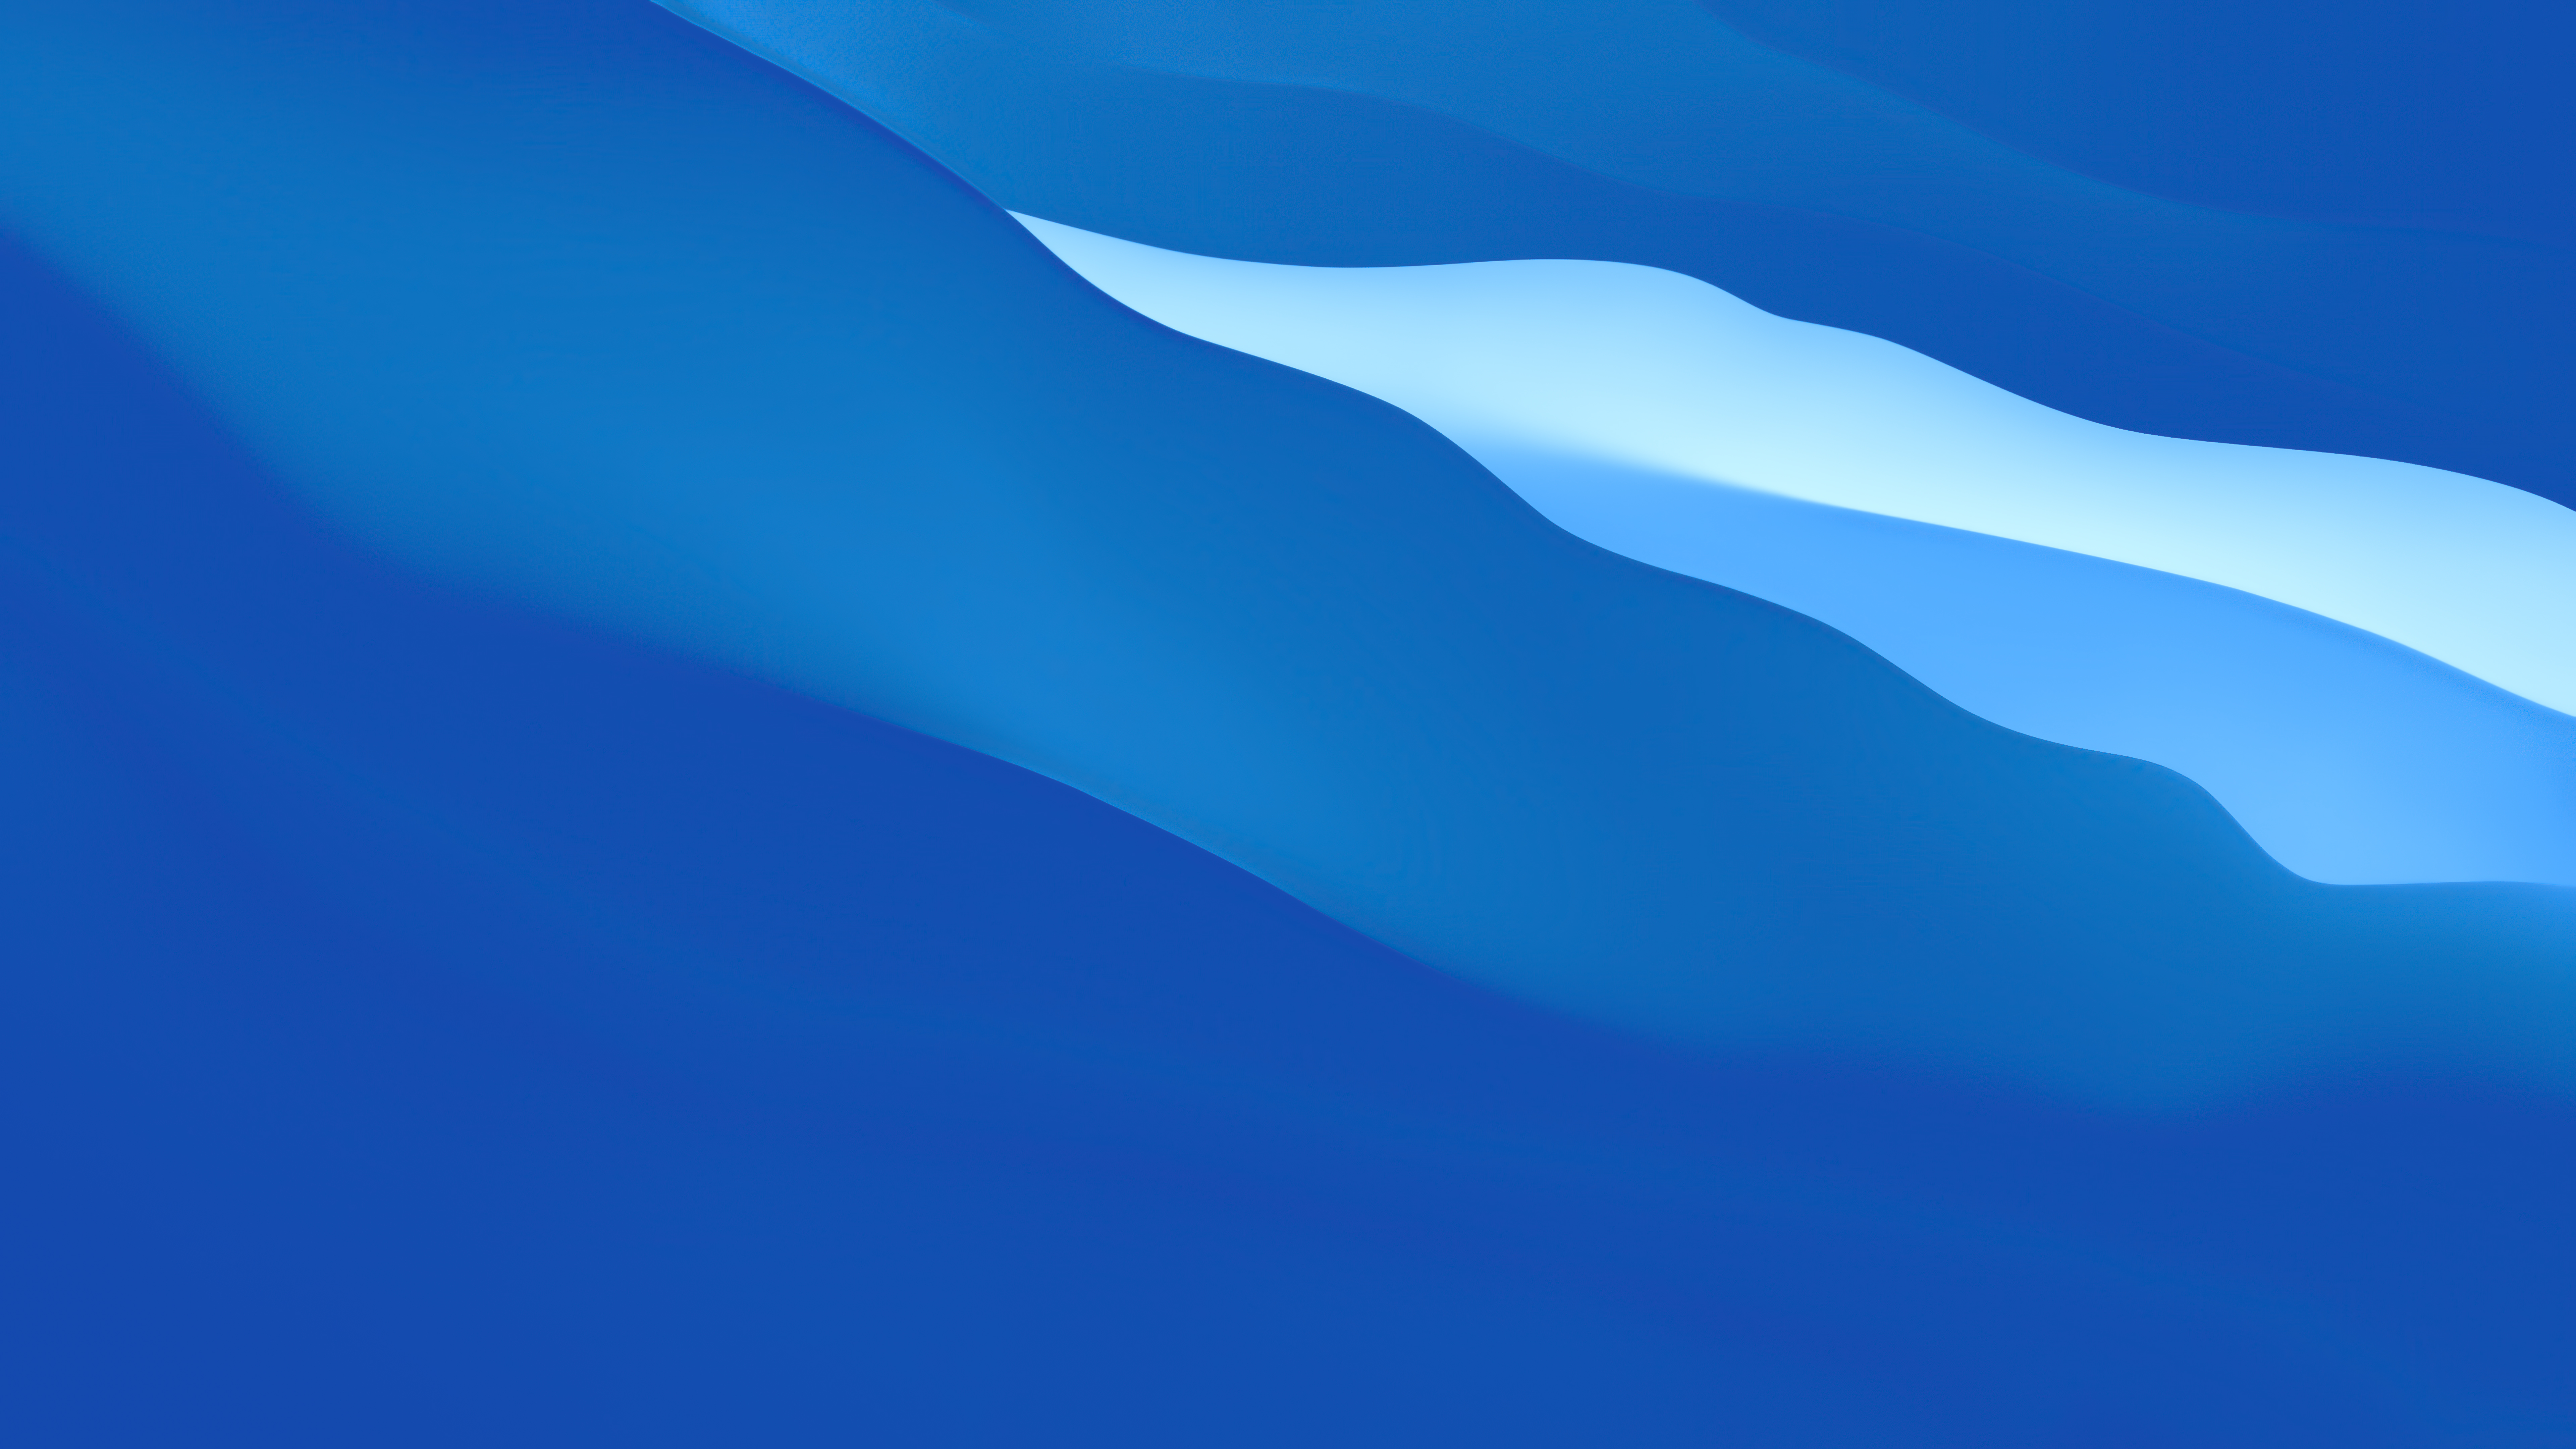 Abstract Blue 4K 8K HD Wallpapers, HD Wallpapers